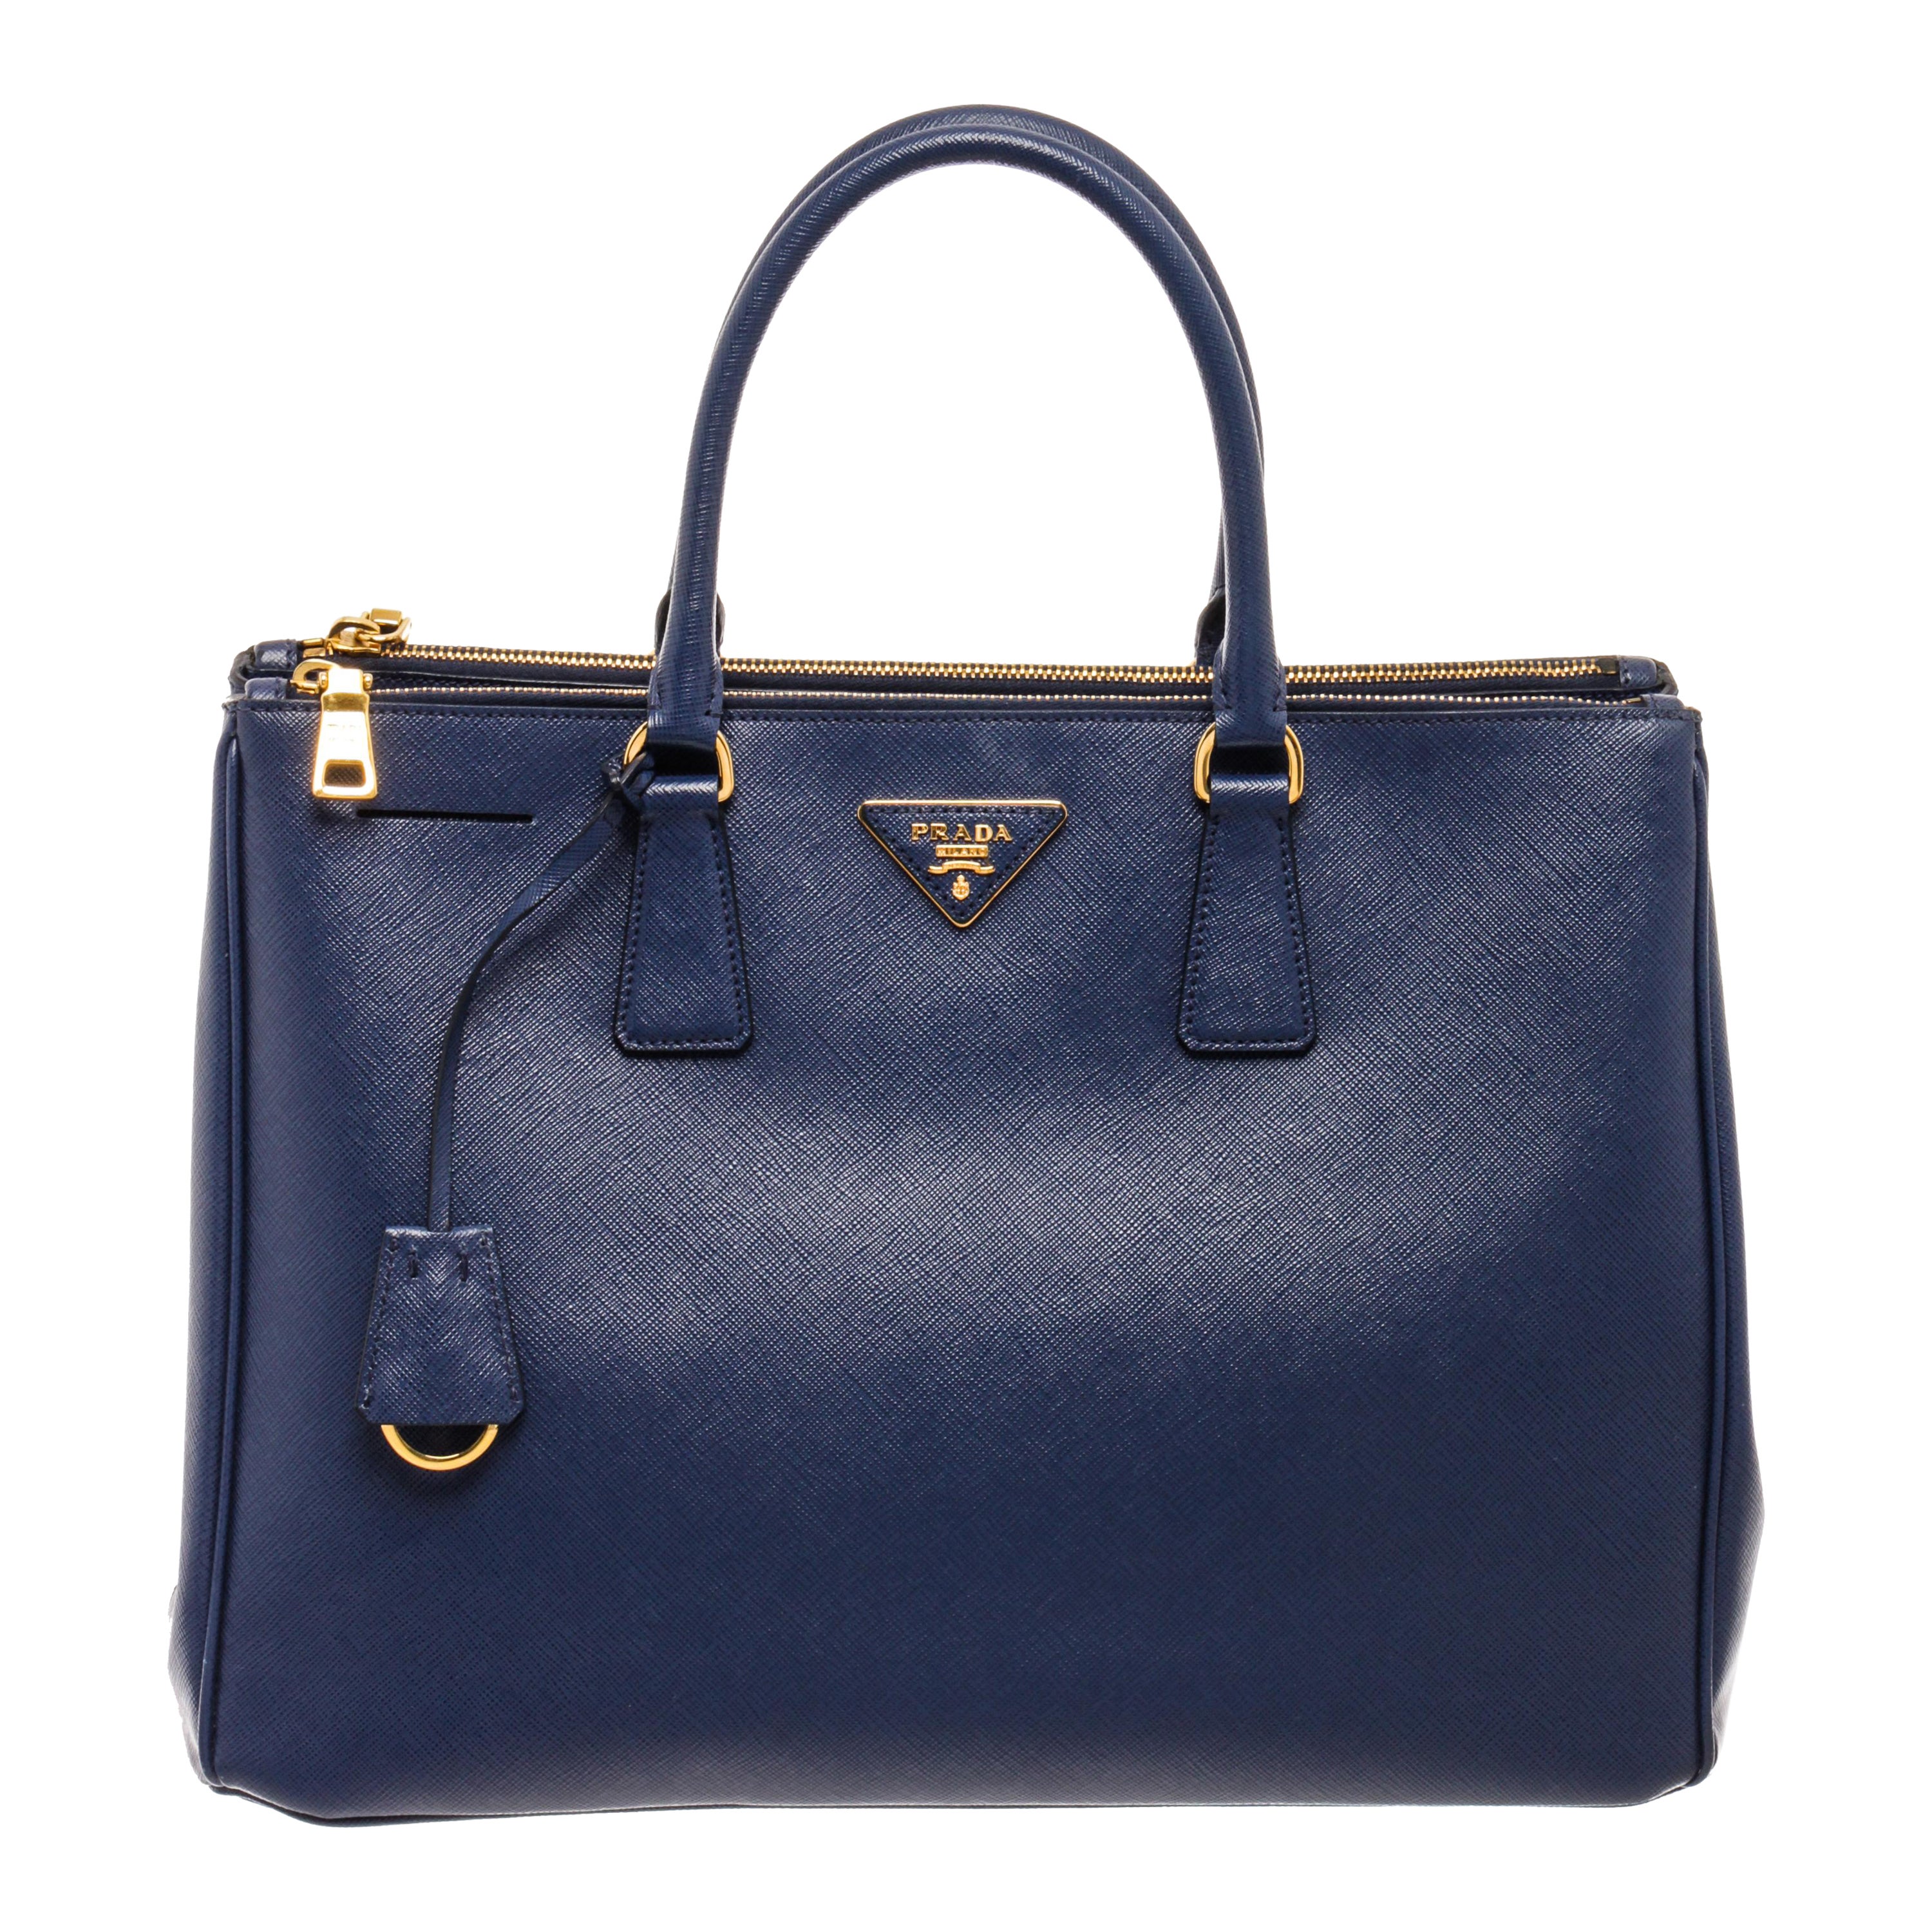 Prada Navy Blue Saffiano Leather Large Galleria Double Zip Tote Bag